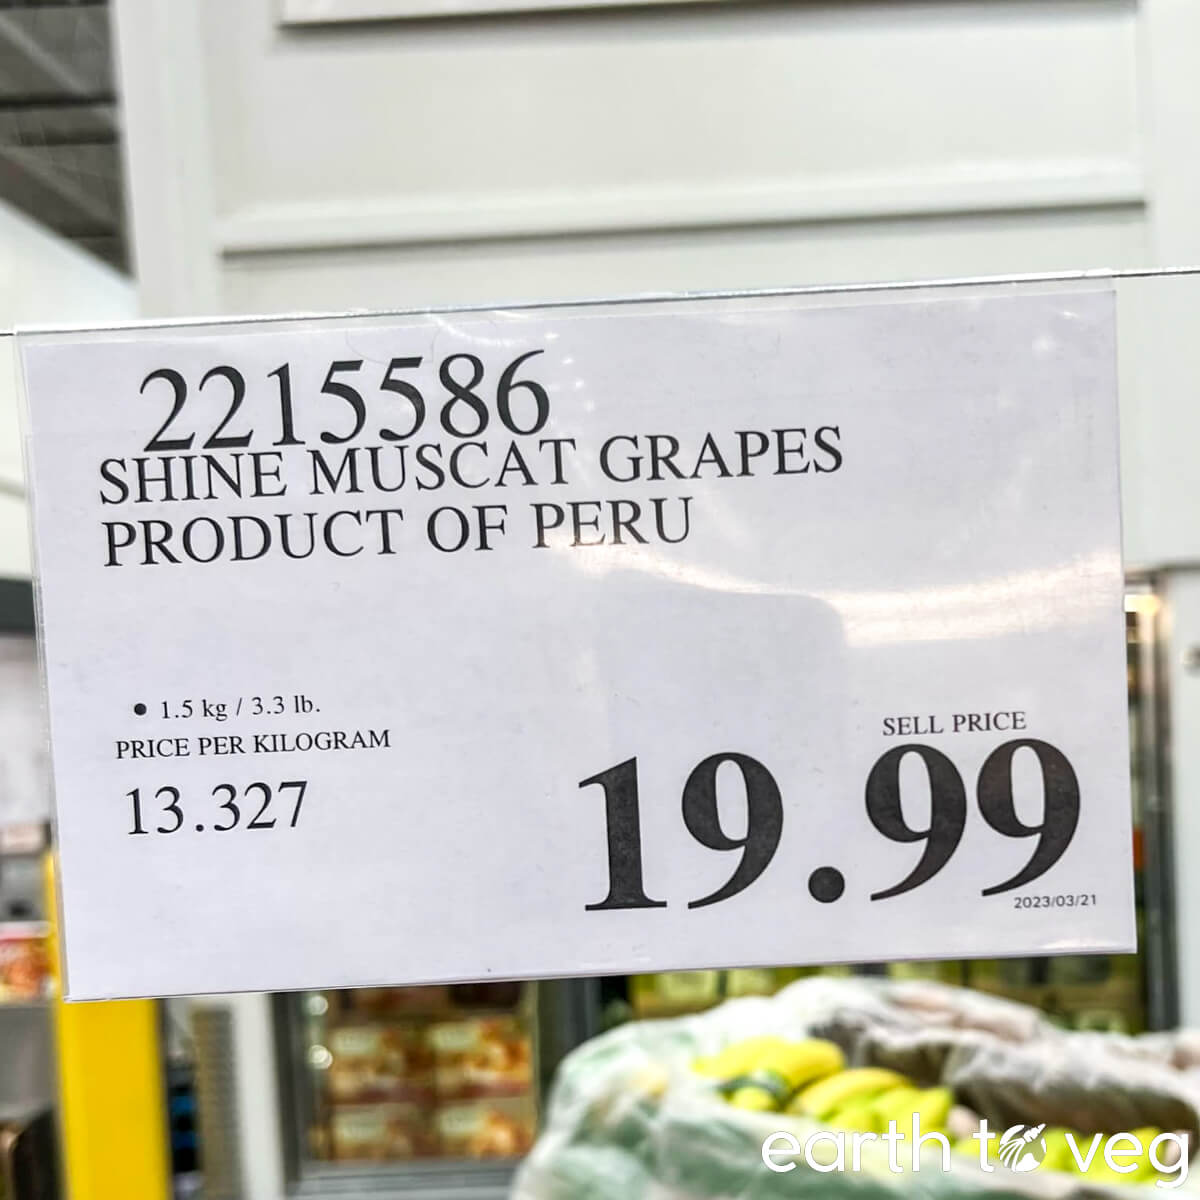 Costco signage for shine muscat grapes from Peru.